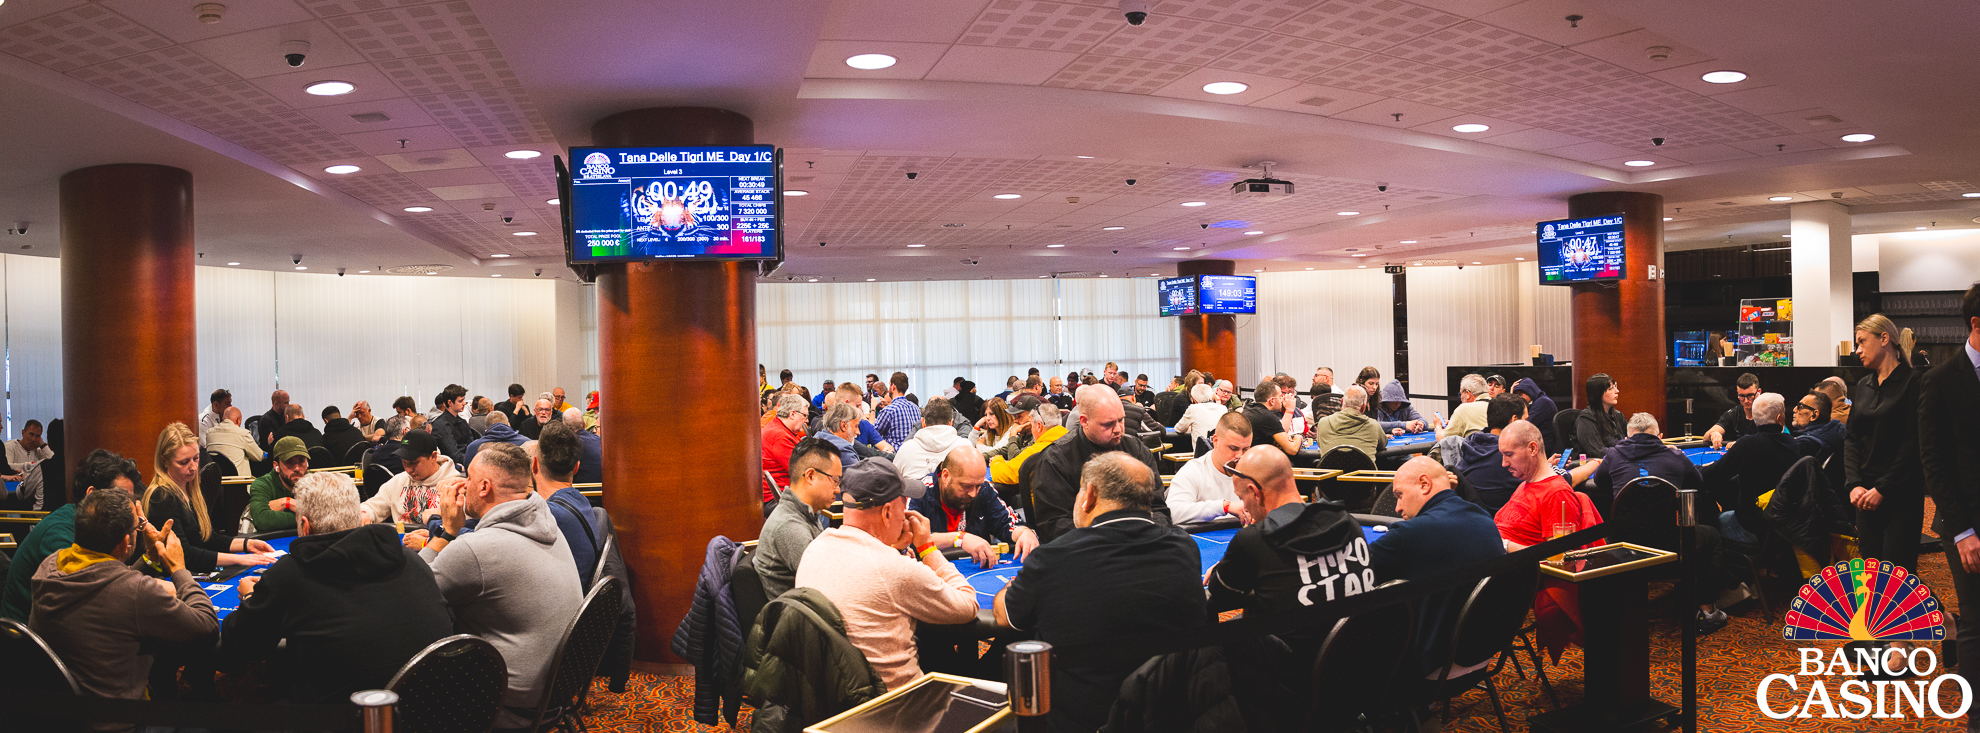 The 250,000€ guarantee of the GTD Tana delle Tigri Main Event at Banco Casino is resisting!